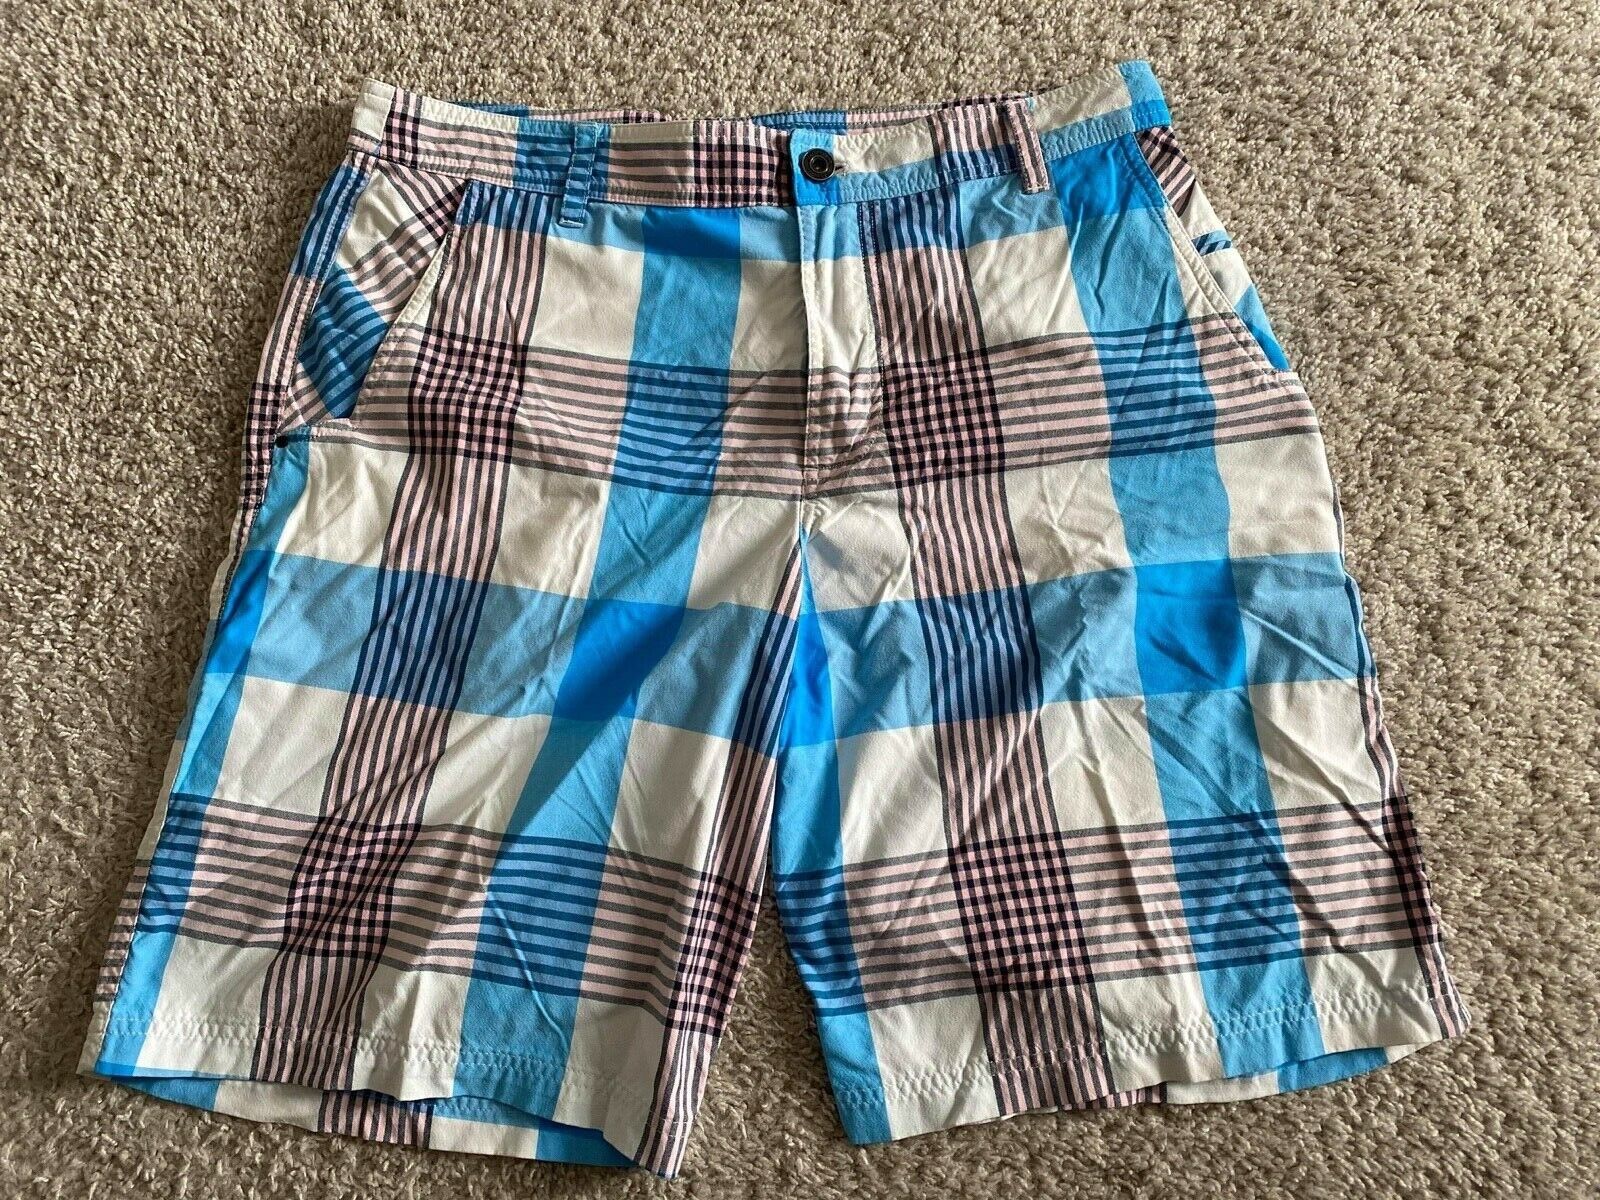 Lululemon Athletica Blue White Plaid Shorts New products world's highest Ranking TOP10 quality popular Casual Mens Stretch